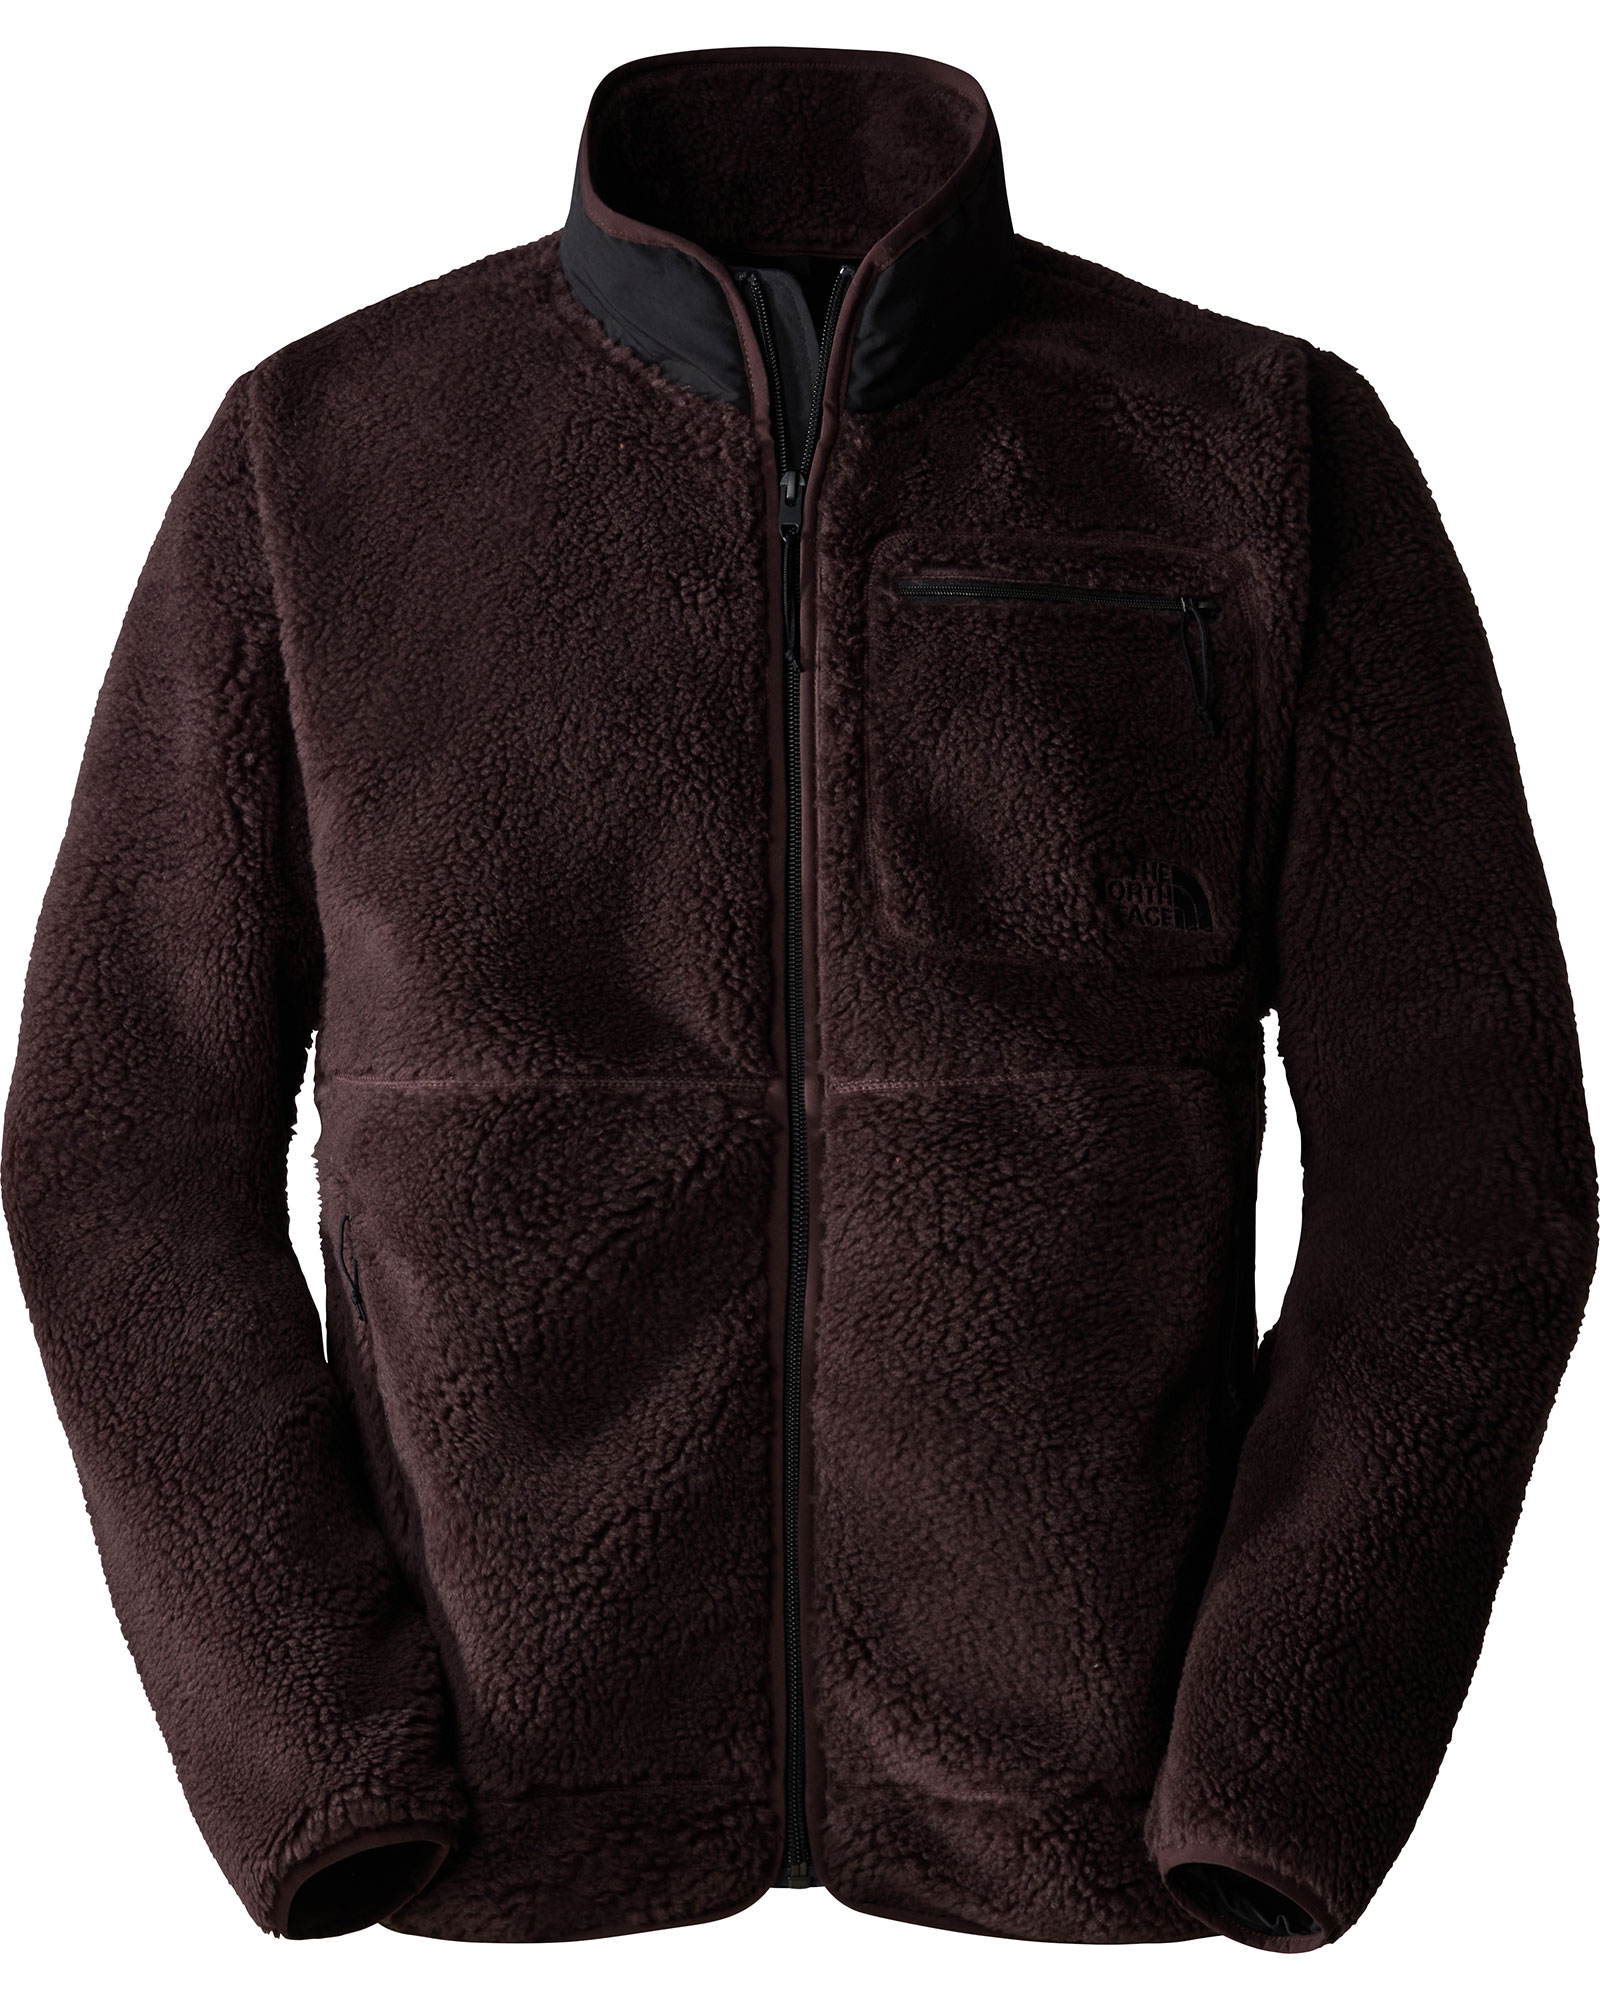 The North Face Men’s Extreme Pile Full Zip Jacket - Coal Brown XXL